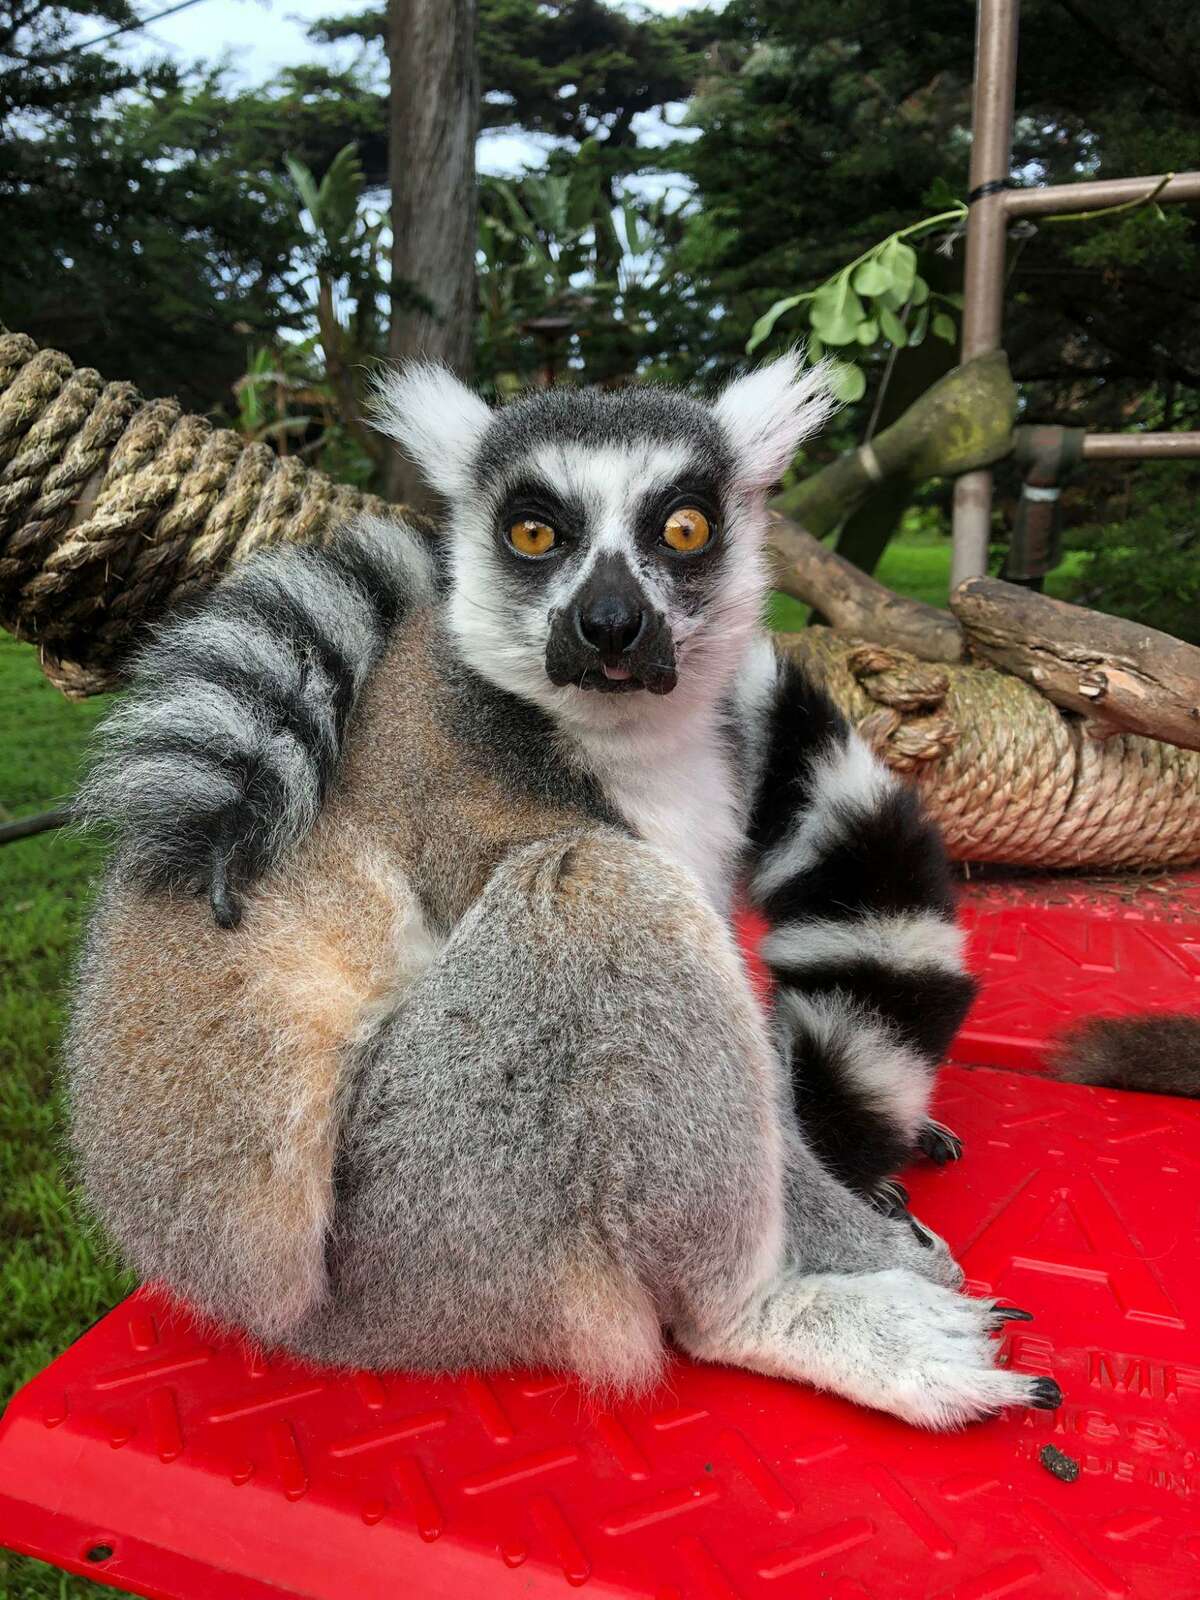 Maki, the 22-year-old lemur who was snatched from the San Francisco Zoo in 2020, has died, zoo officials said.